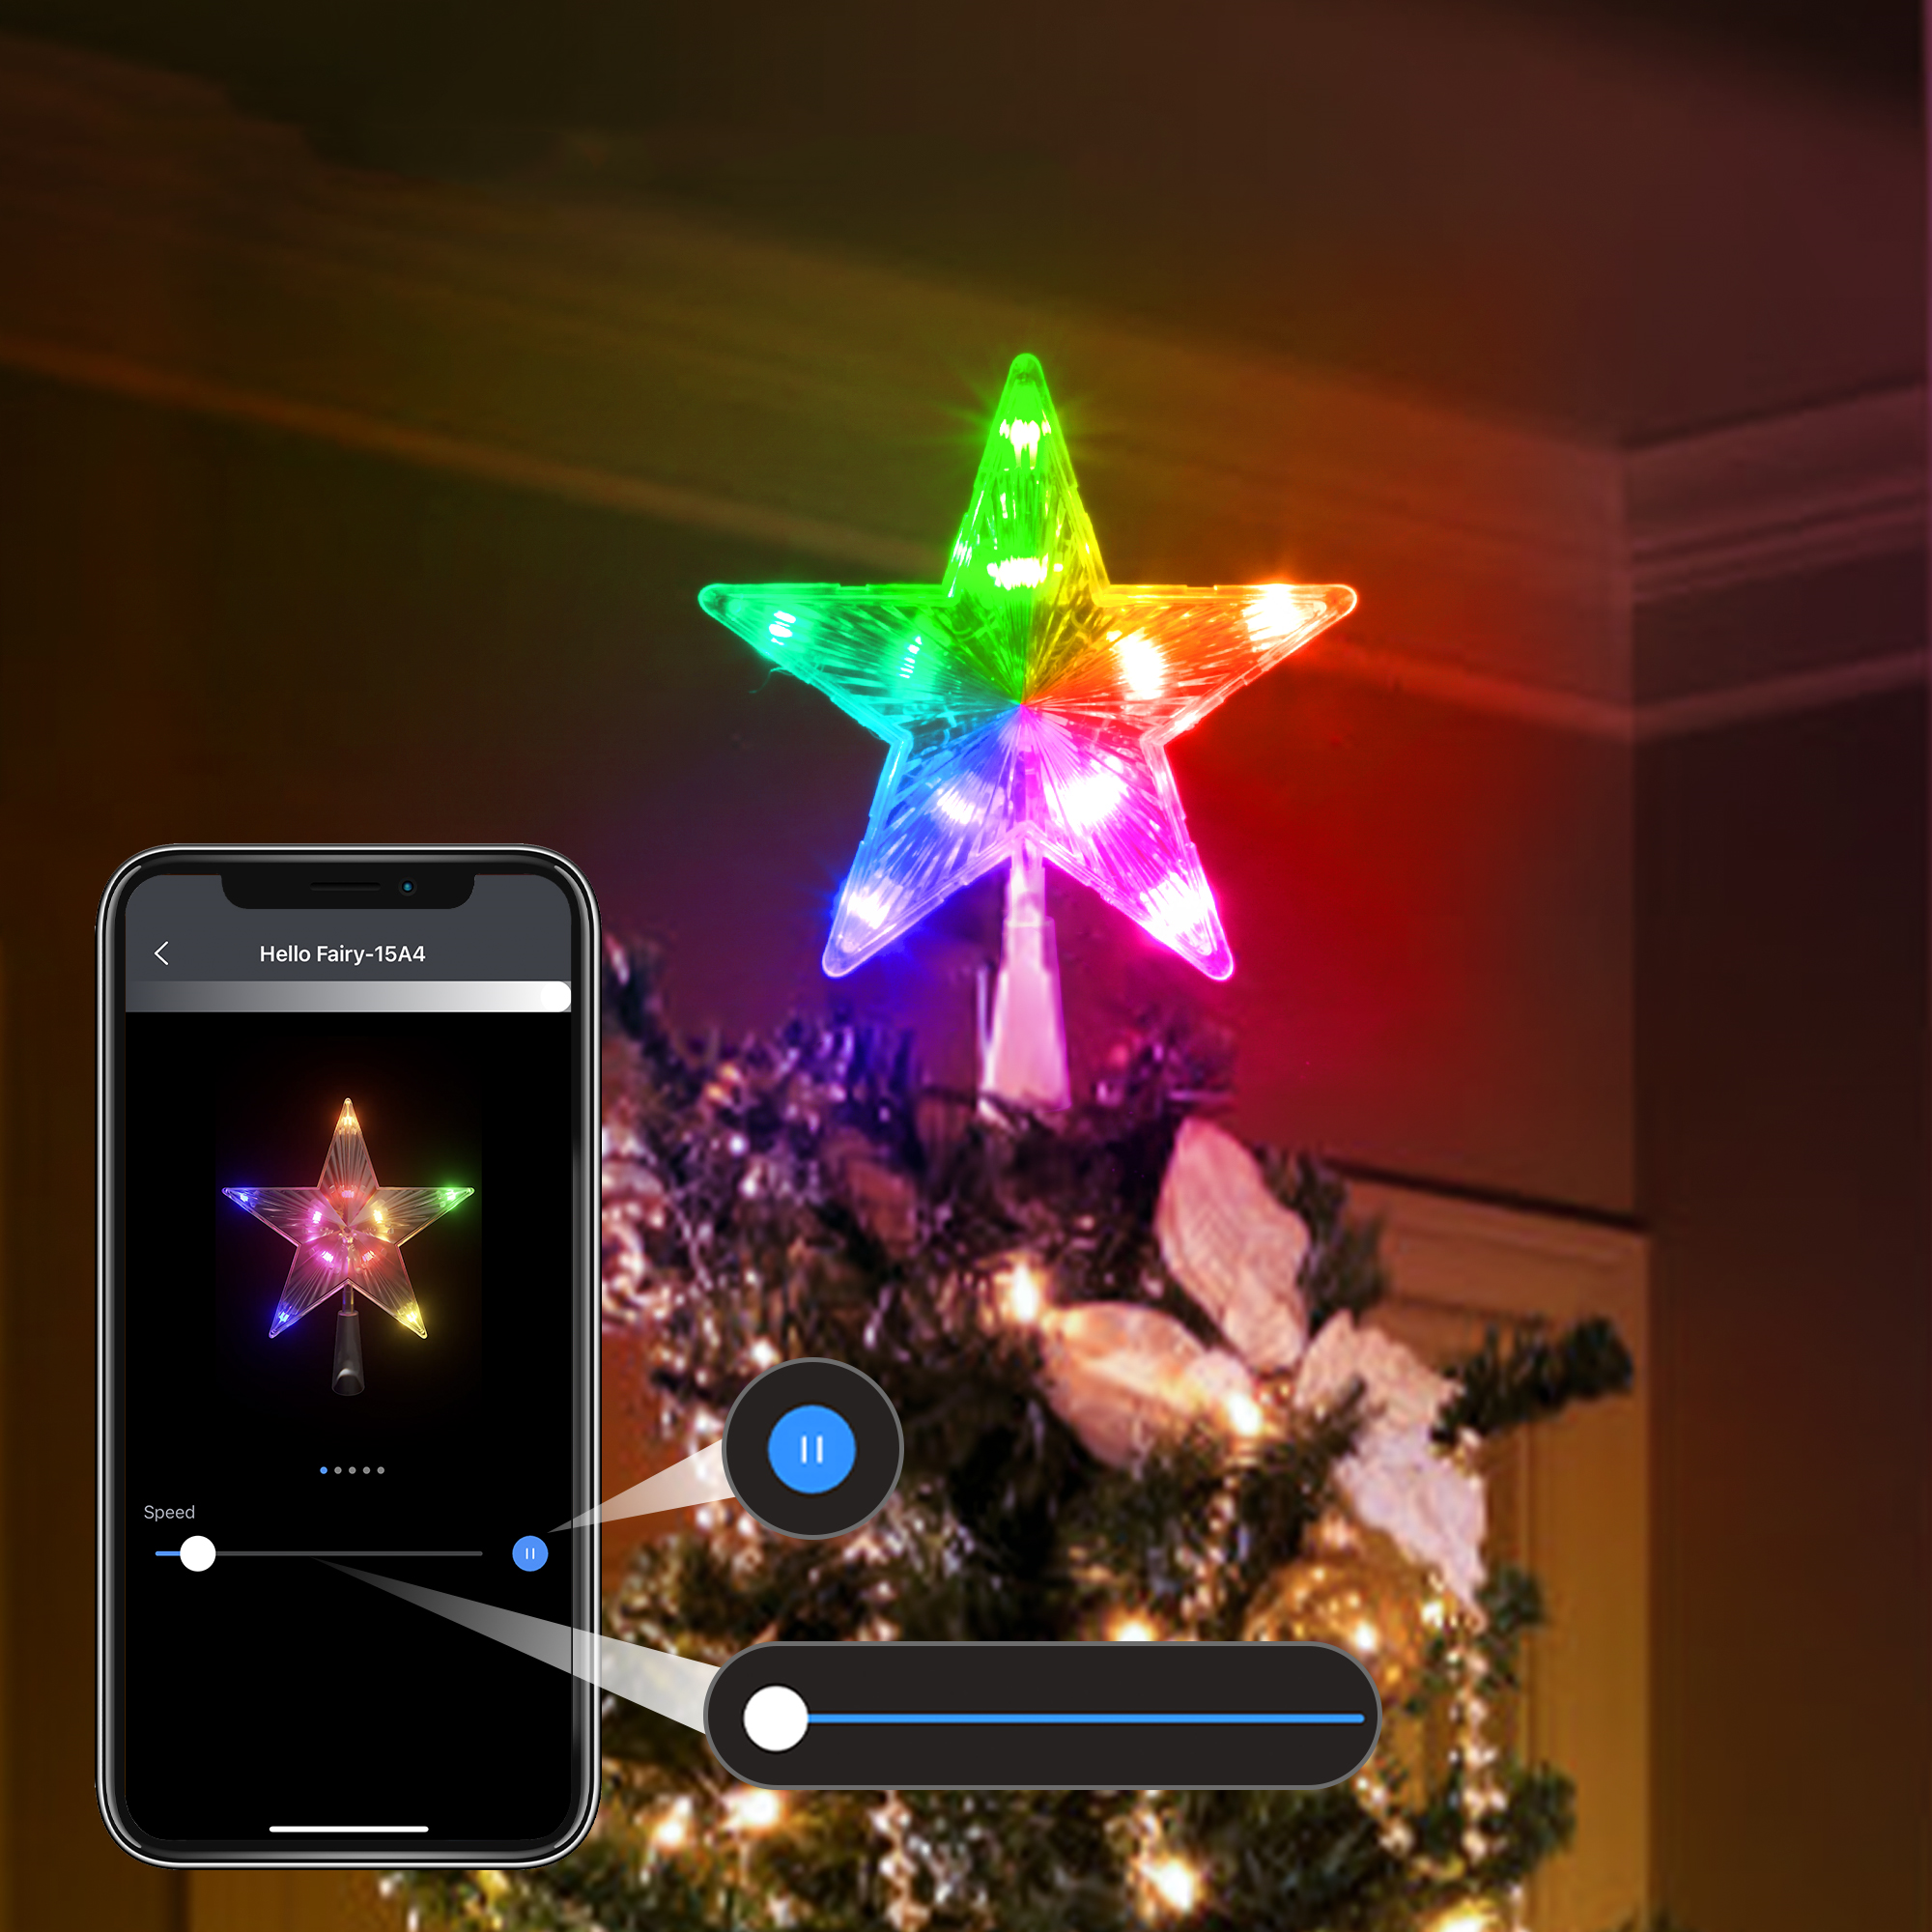 Christmas Tree Topper Light Smart App Remote Control 7 LED Color Changing  Star Tree Toppers Sync with Music Dimmable Timer USB Plug in/Wire 16.4Ft  Topper for Xmas Party Holiday 